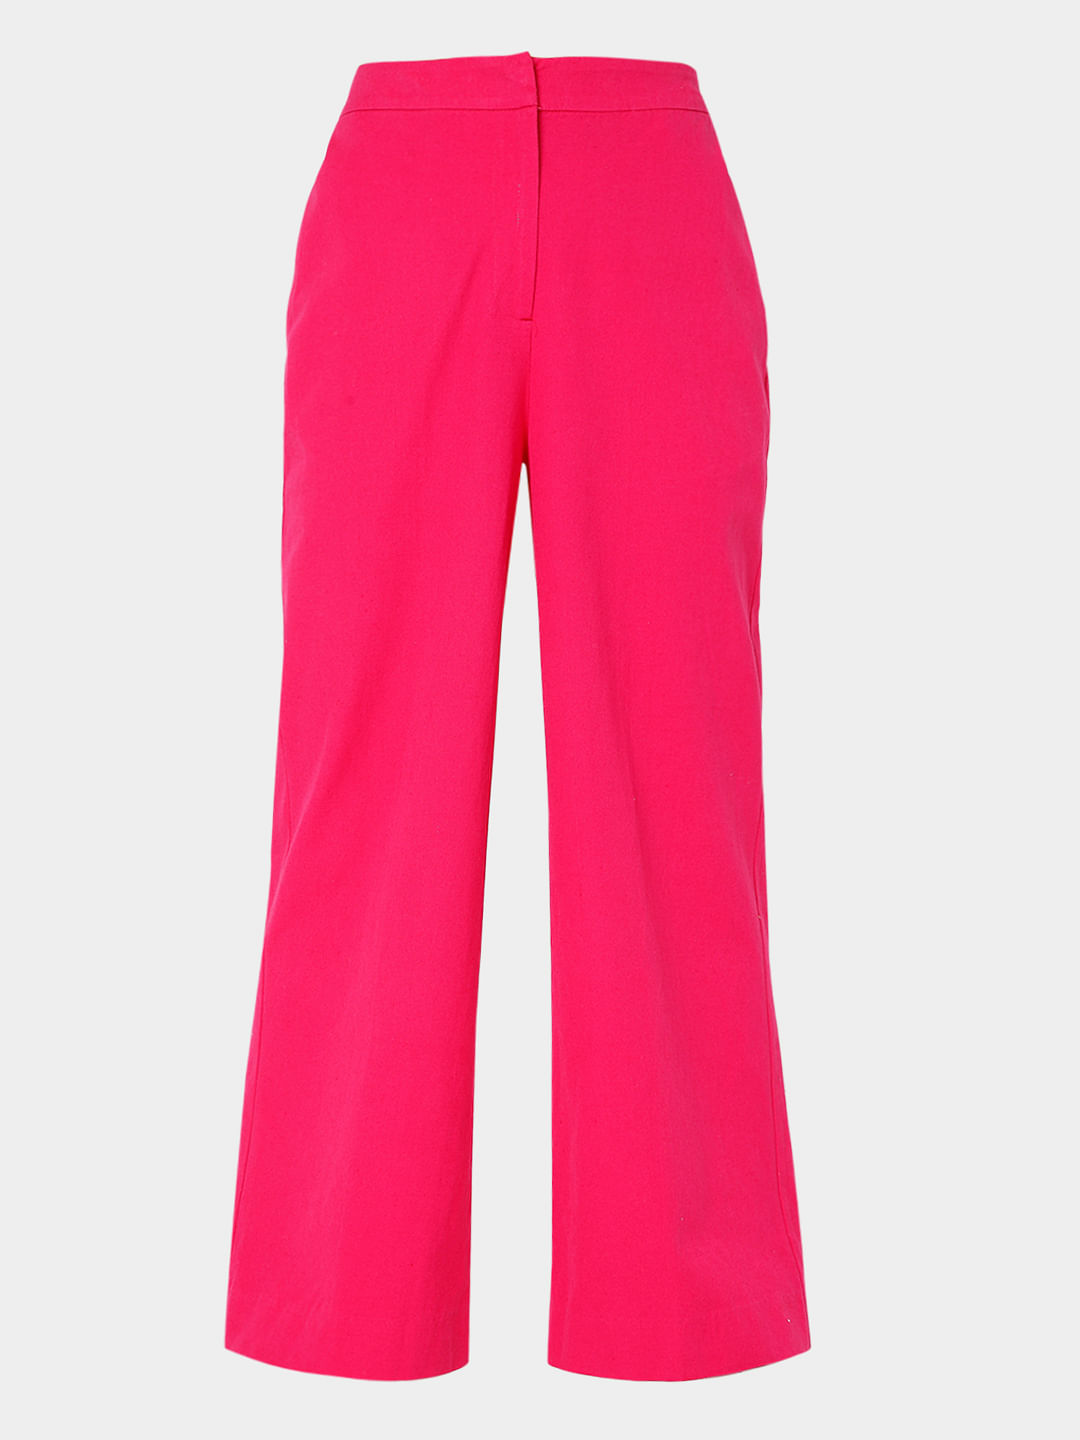 Stealing The Show High Waist Trousers In Hot Pink  Summer pants outfits  Pink pants outfit Clothes